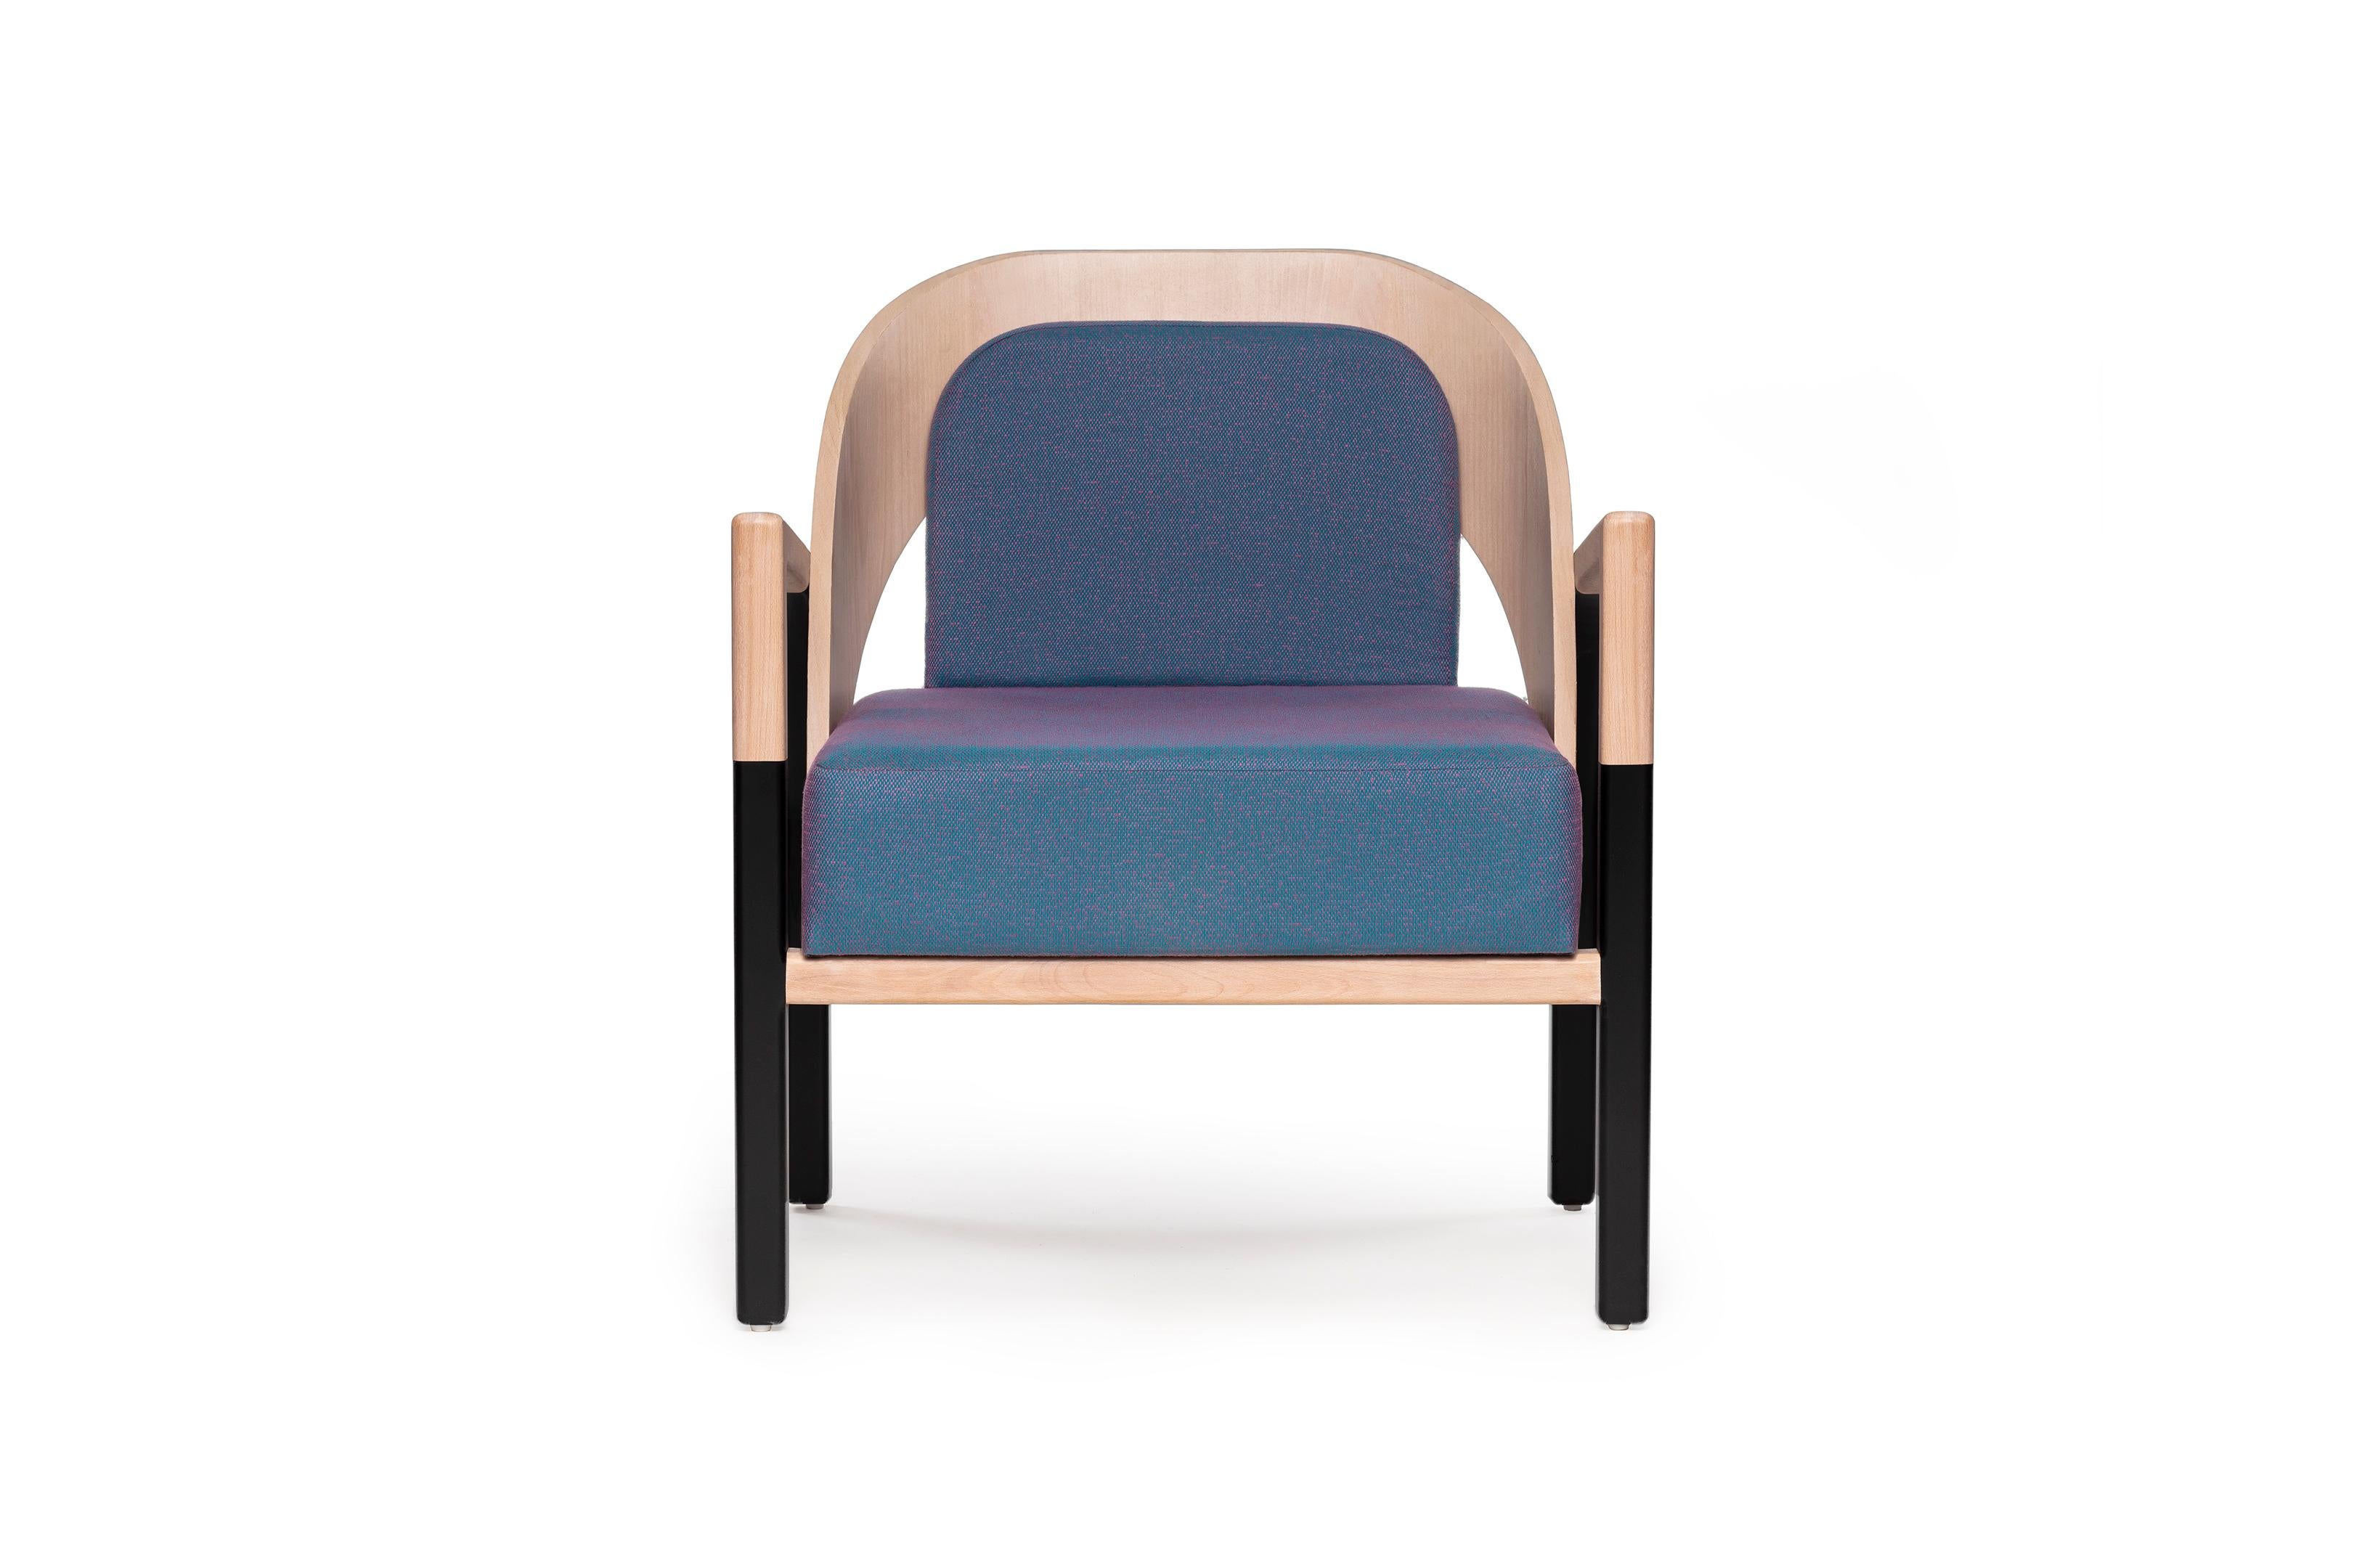 Mexican Mid-Century Modern Style Solid Wood Armchair Upholstered in Cerulean Textile For Sale